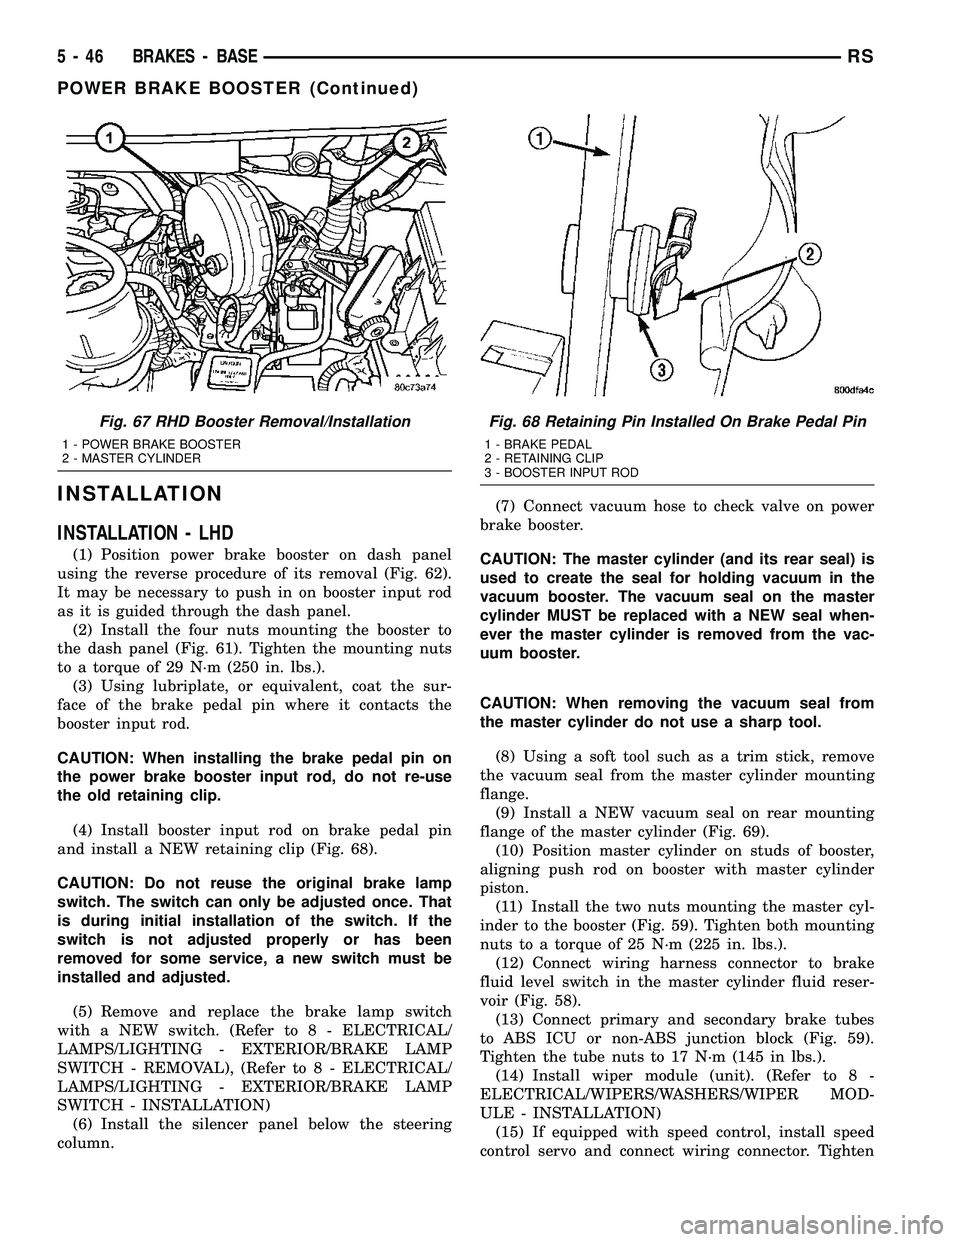 DODGE TOWN AND COUNTRY 2004  Service Manual INSTALLATION
INSTALLATION - LHD
(1) Position power brake booster on dash panel
using the reverse procedure of its removal (Fig. 62).
It may be necessary to push in on booster input rod
as it is guided